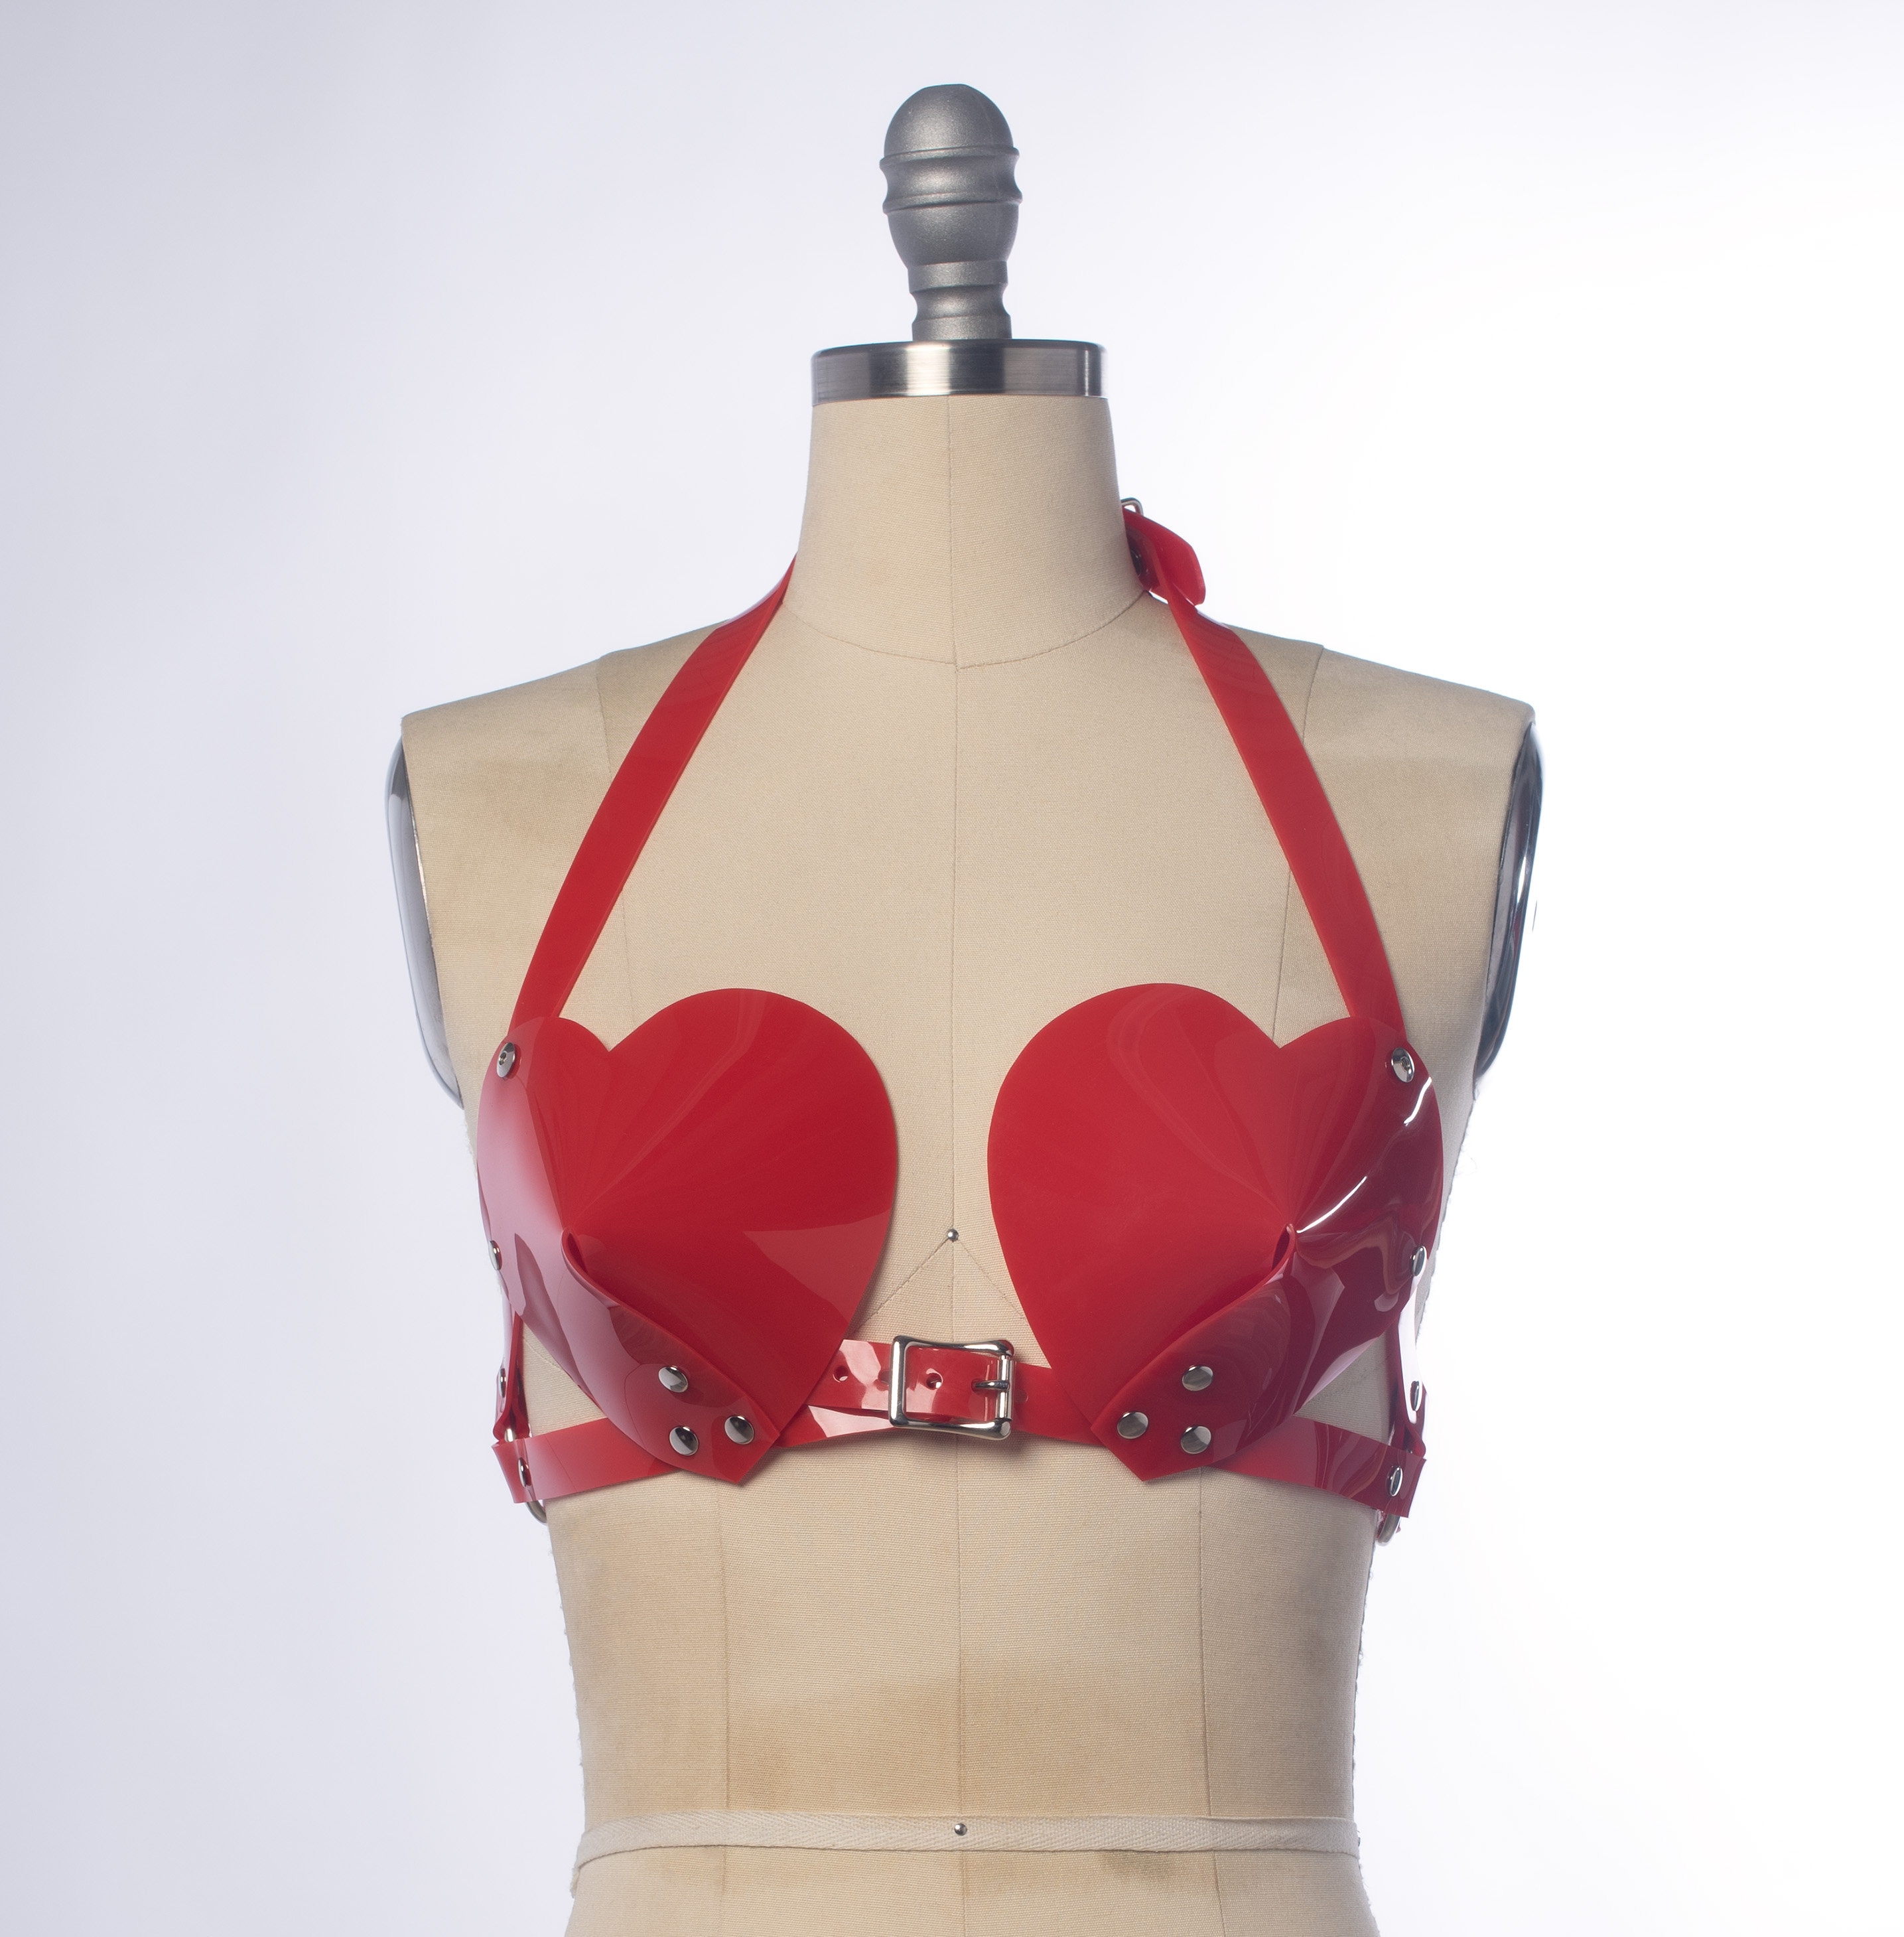 Heart Shaped Harness, Cone Bra, Pvc Halter Top, Retro Bullet Bra, Vegan  Leather, Gothic Rave, Pastelgoth Kawaii, Valentine's Day, Red Pink -   New Zealand